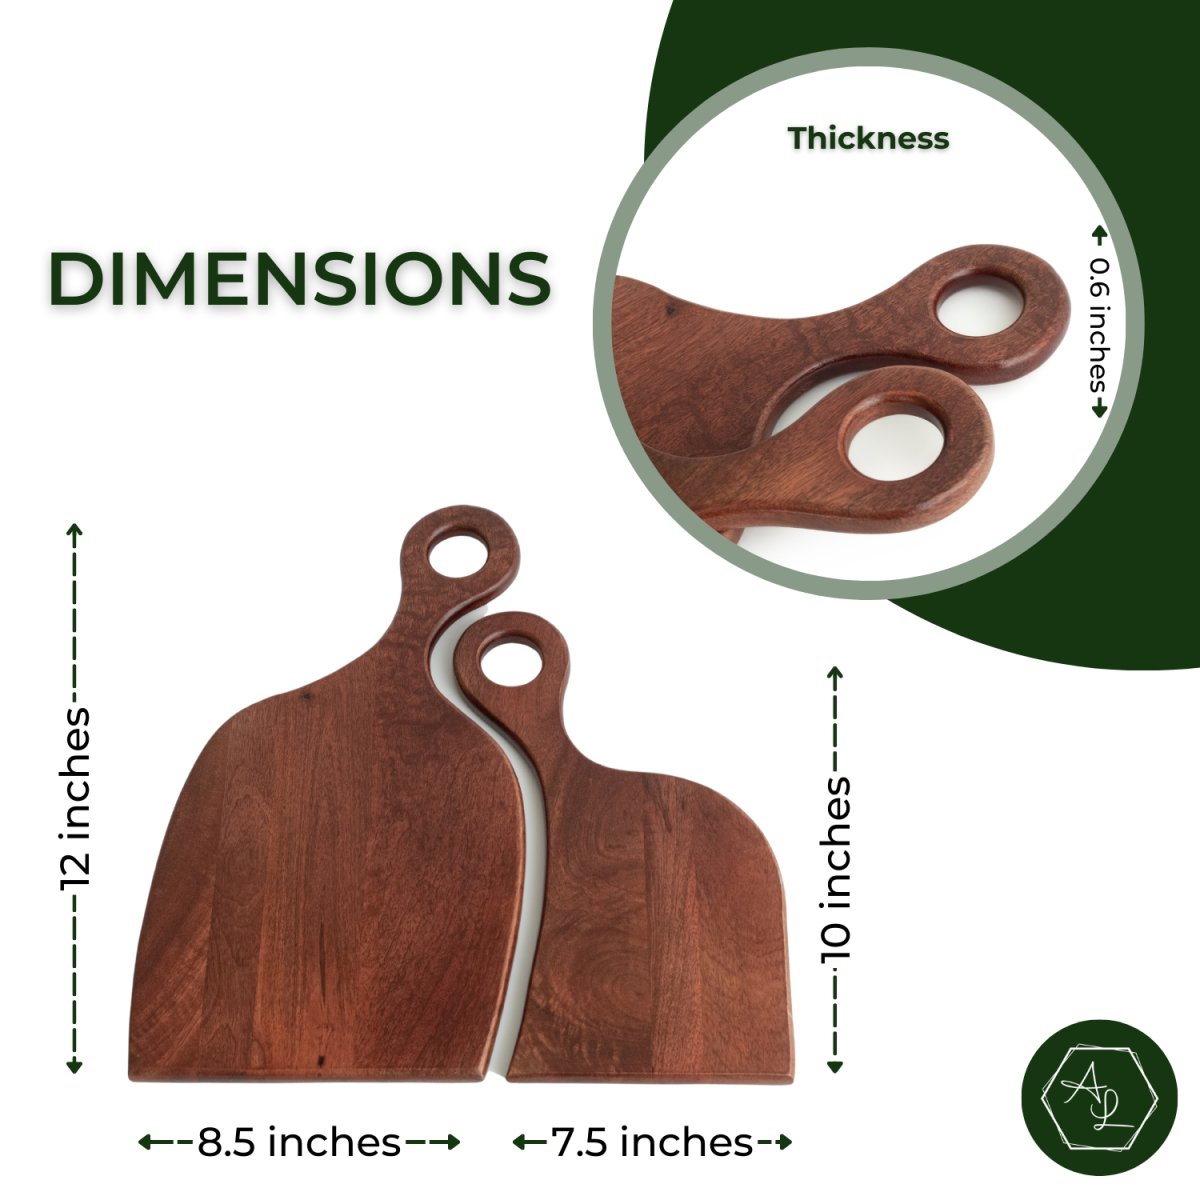 Romantic Wooden Charcuterie Boards, Set of 2, dimensions image - Aesthetic Living